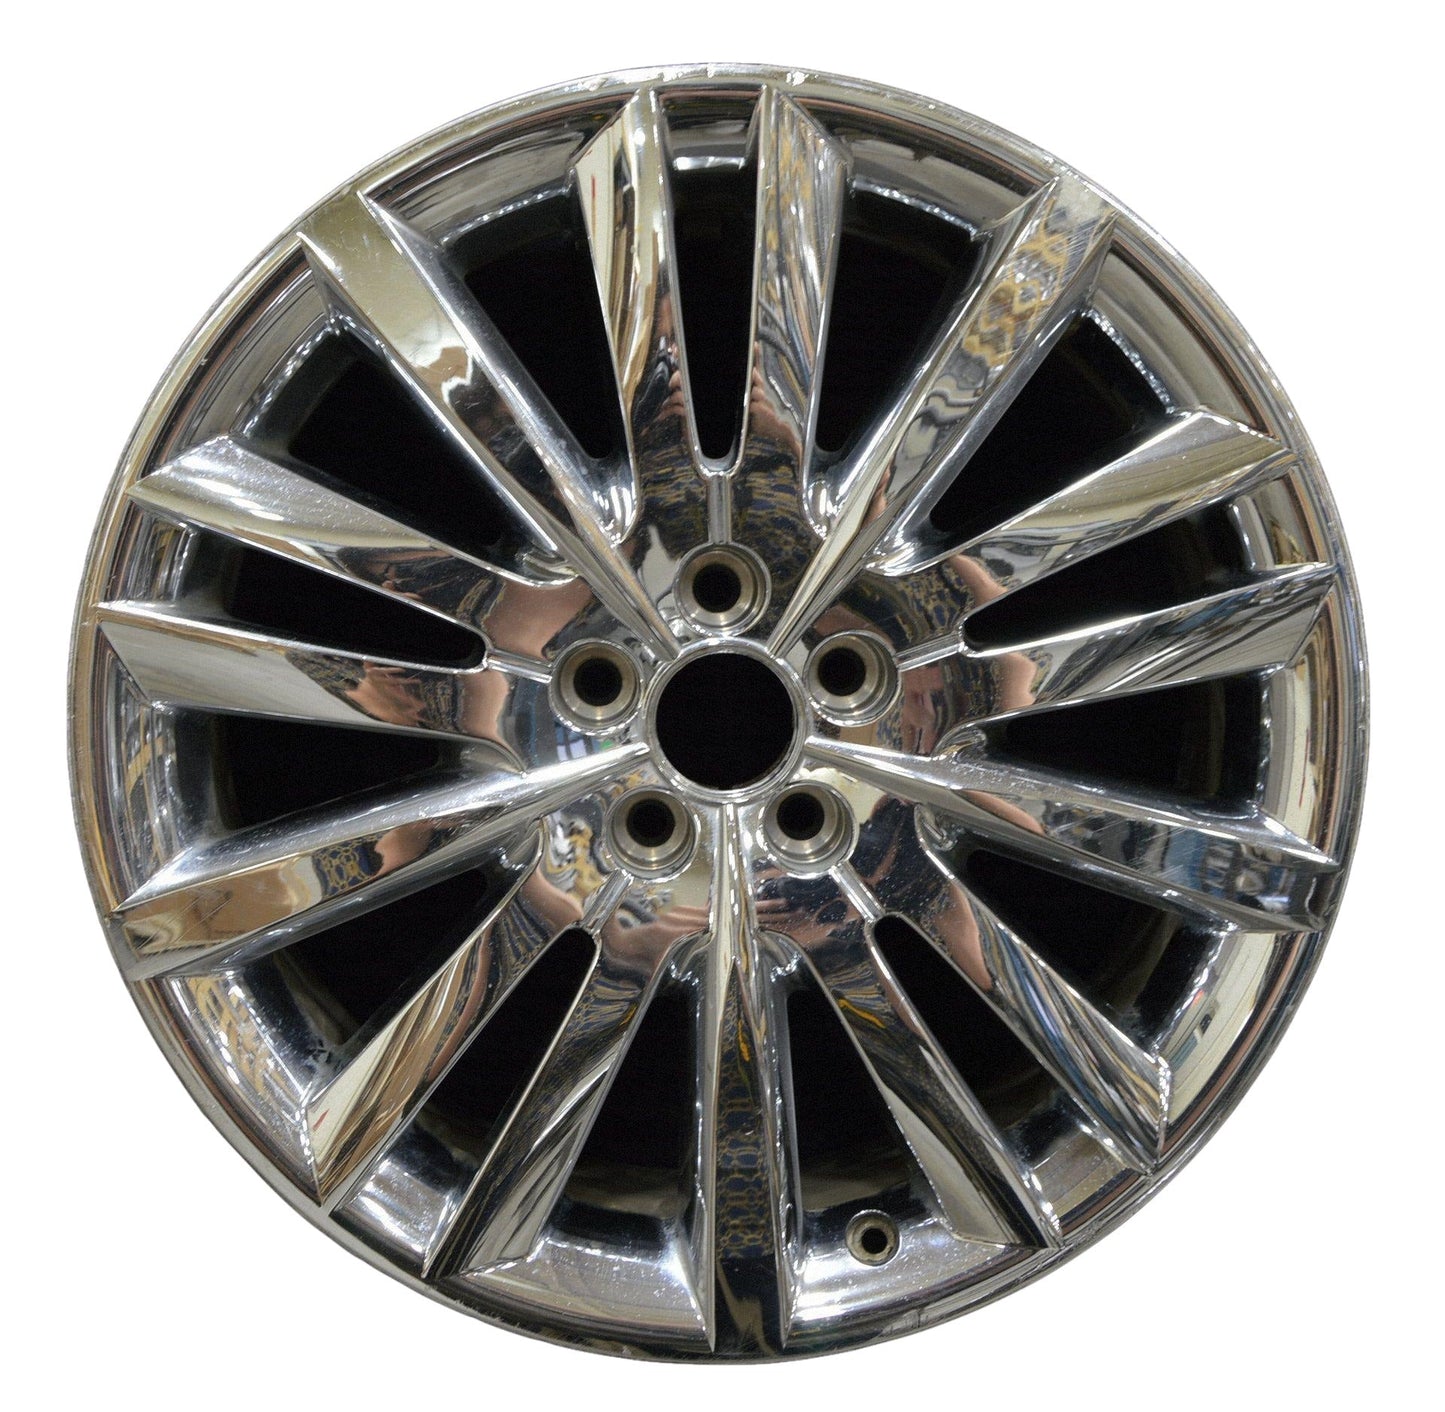 Lincoln MKX  2011, 2012, 2013, 2014, 2015 Factory OEM Car Wheel Size 20x8 Alloy WAO.3853.FULL.CHRC